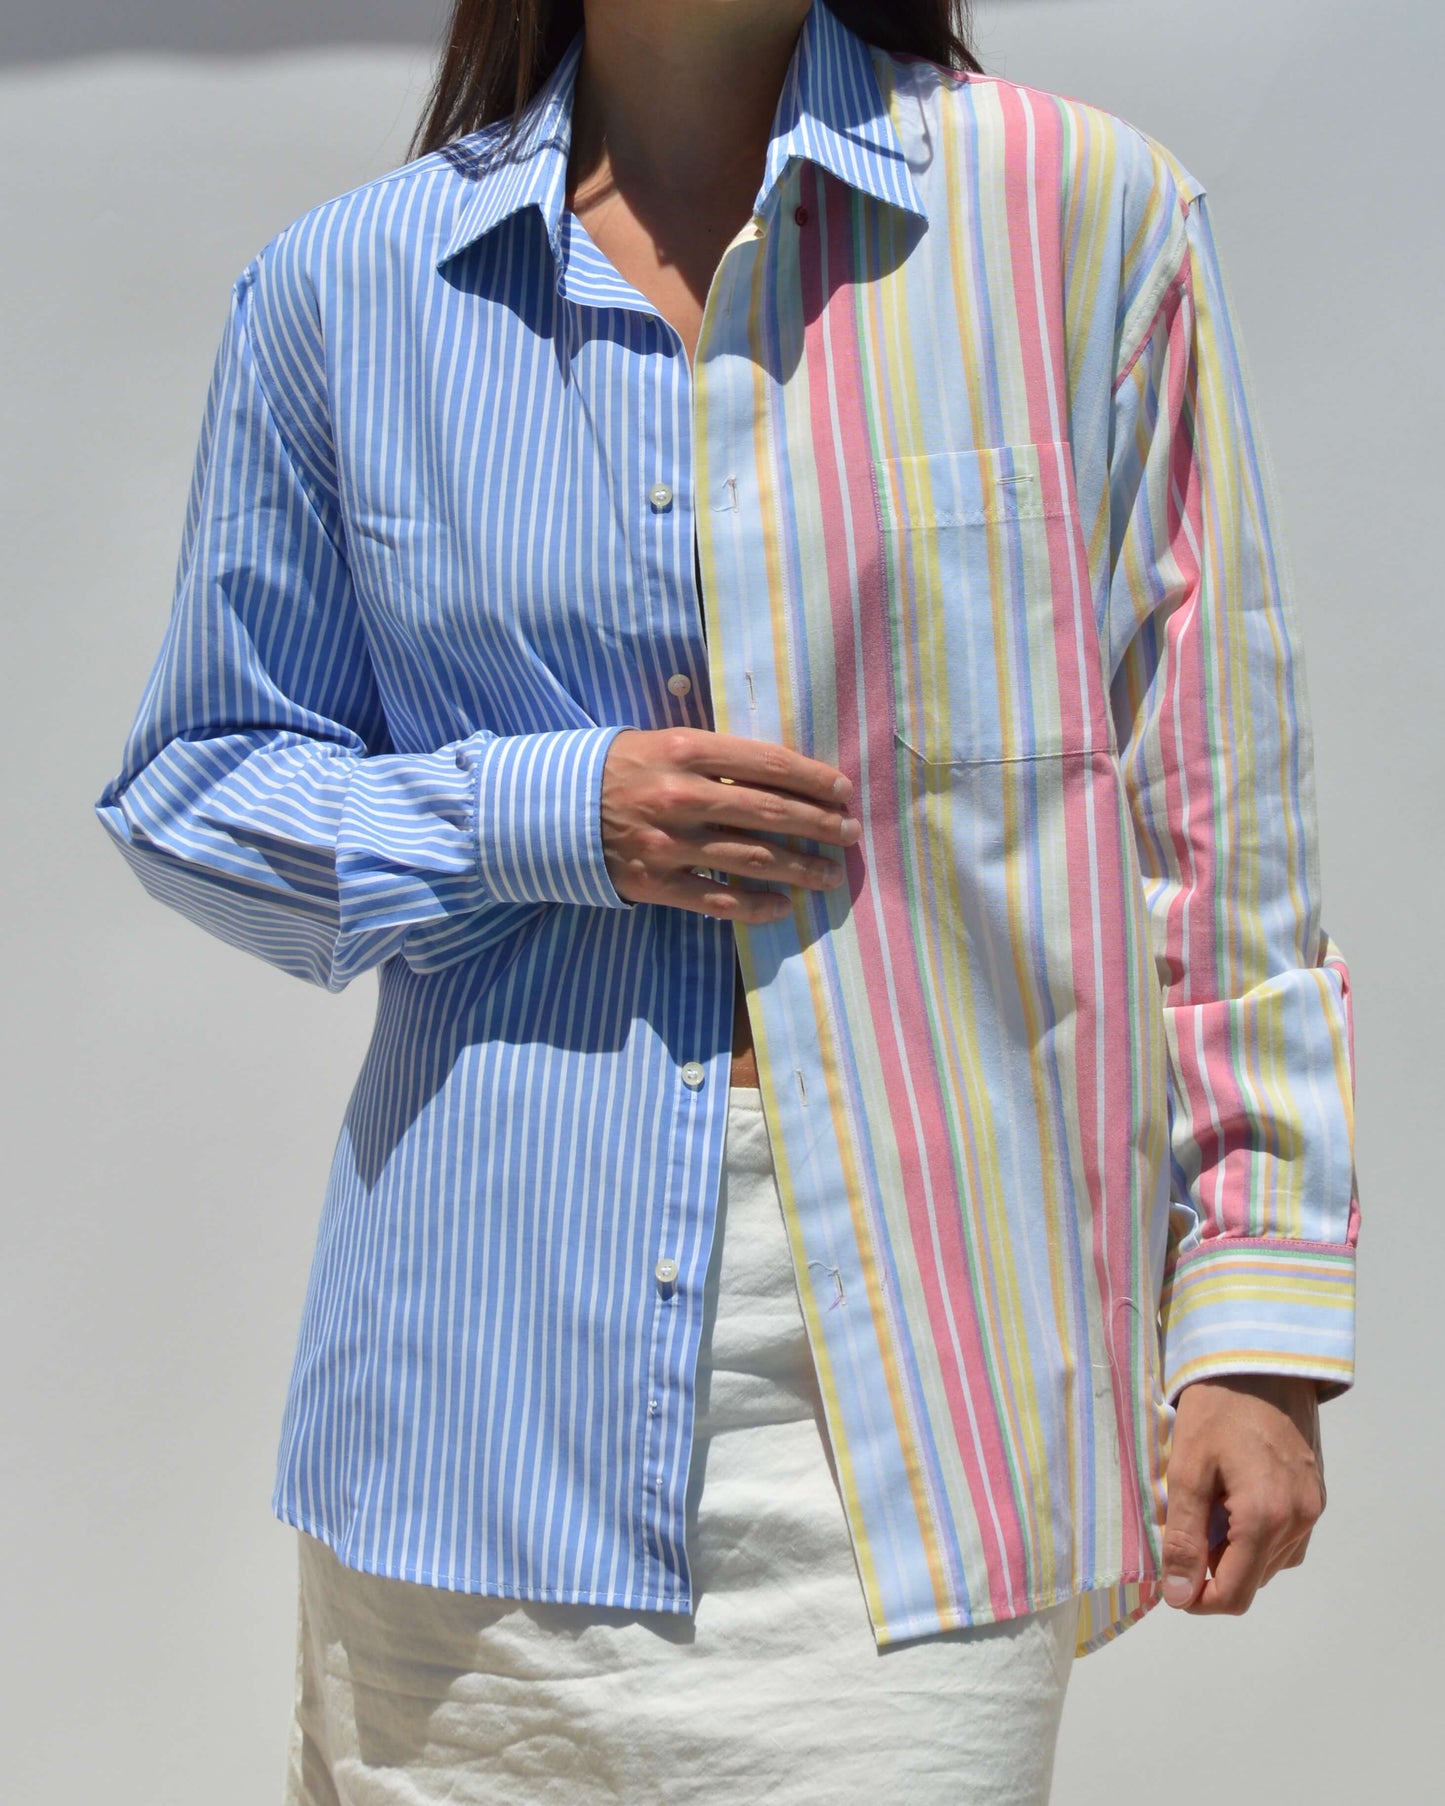 DUO Shirt - Summer Party (S/L)